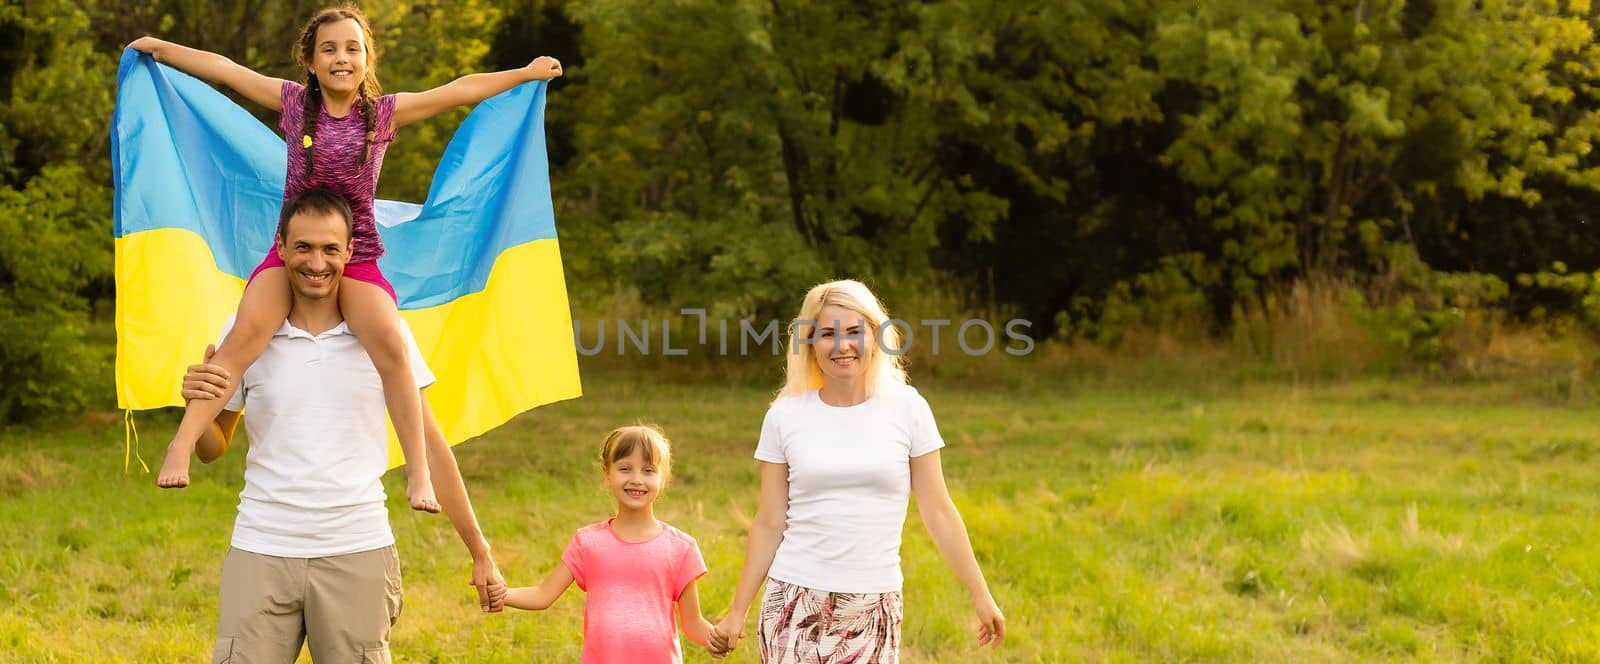 family with the flag of ukraine.